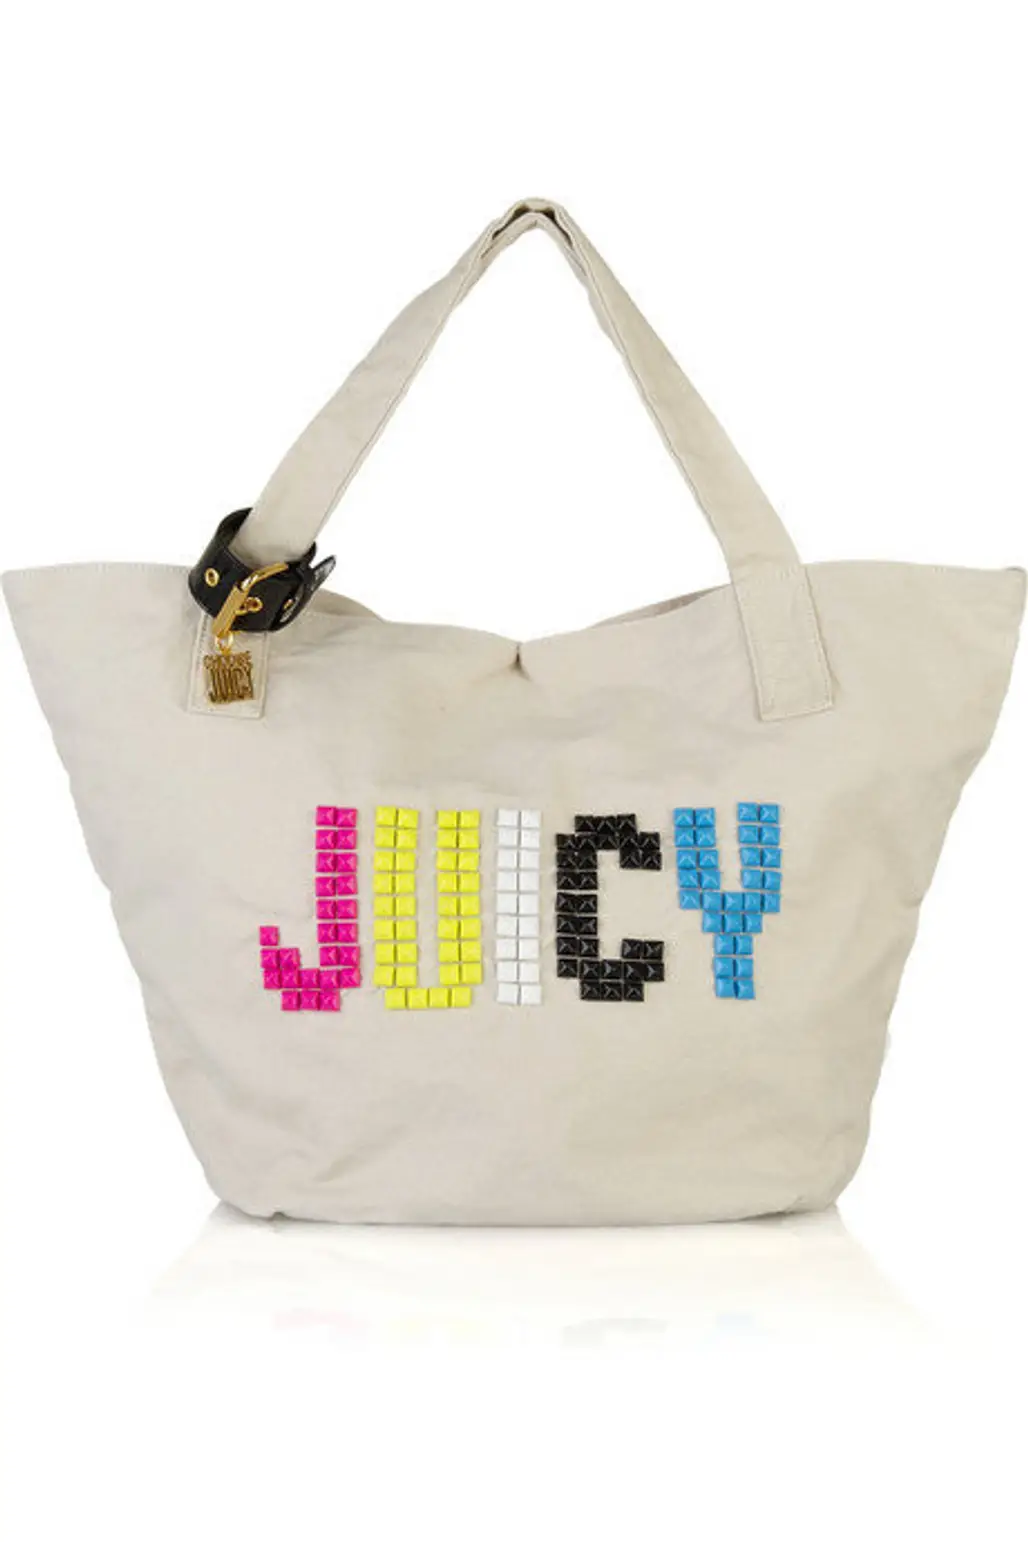 Juicy Couture Studded Canvas Tote